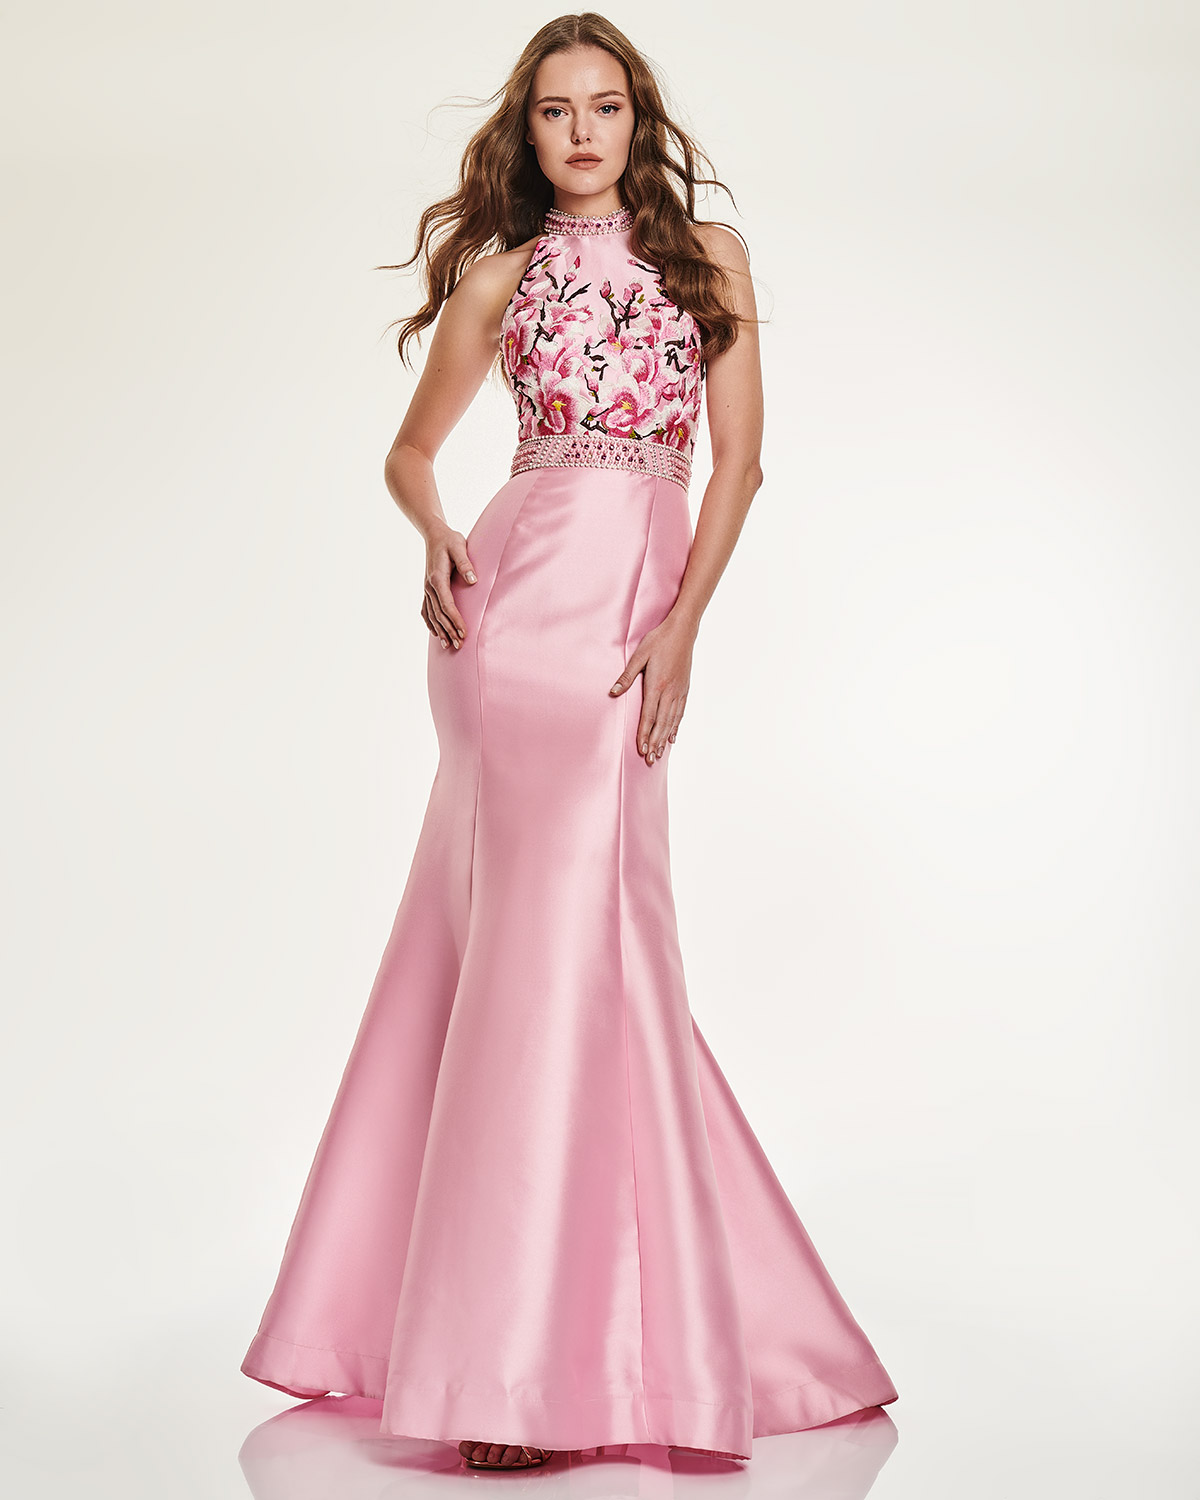 Long Evening Dress with floral bust and beading